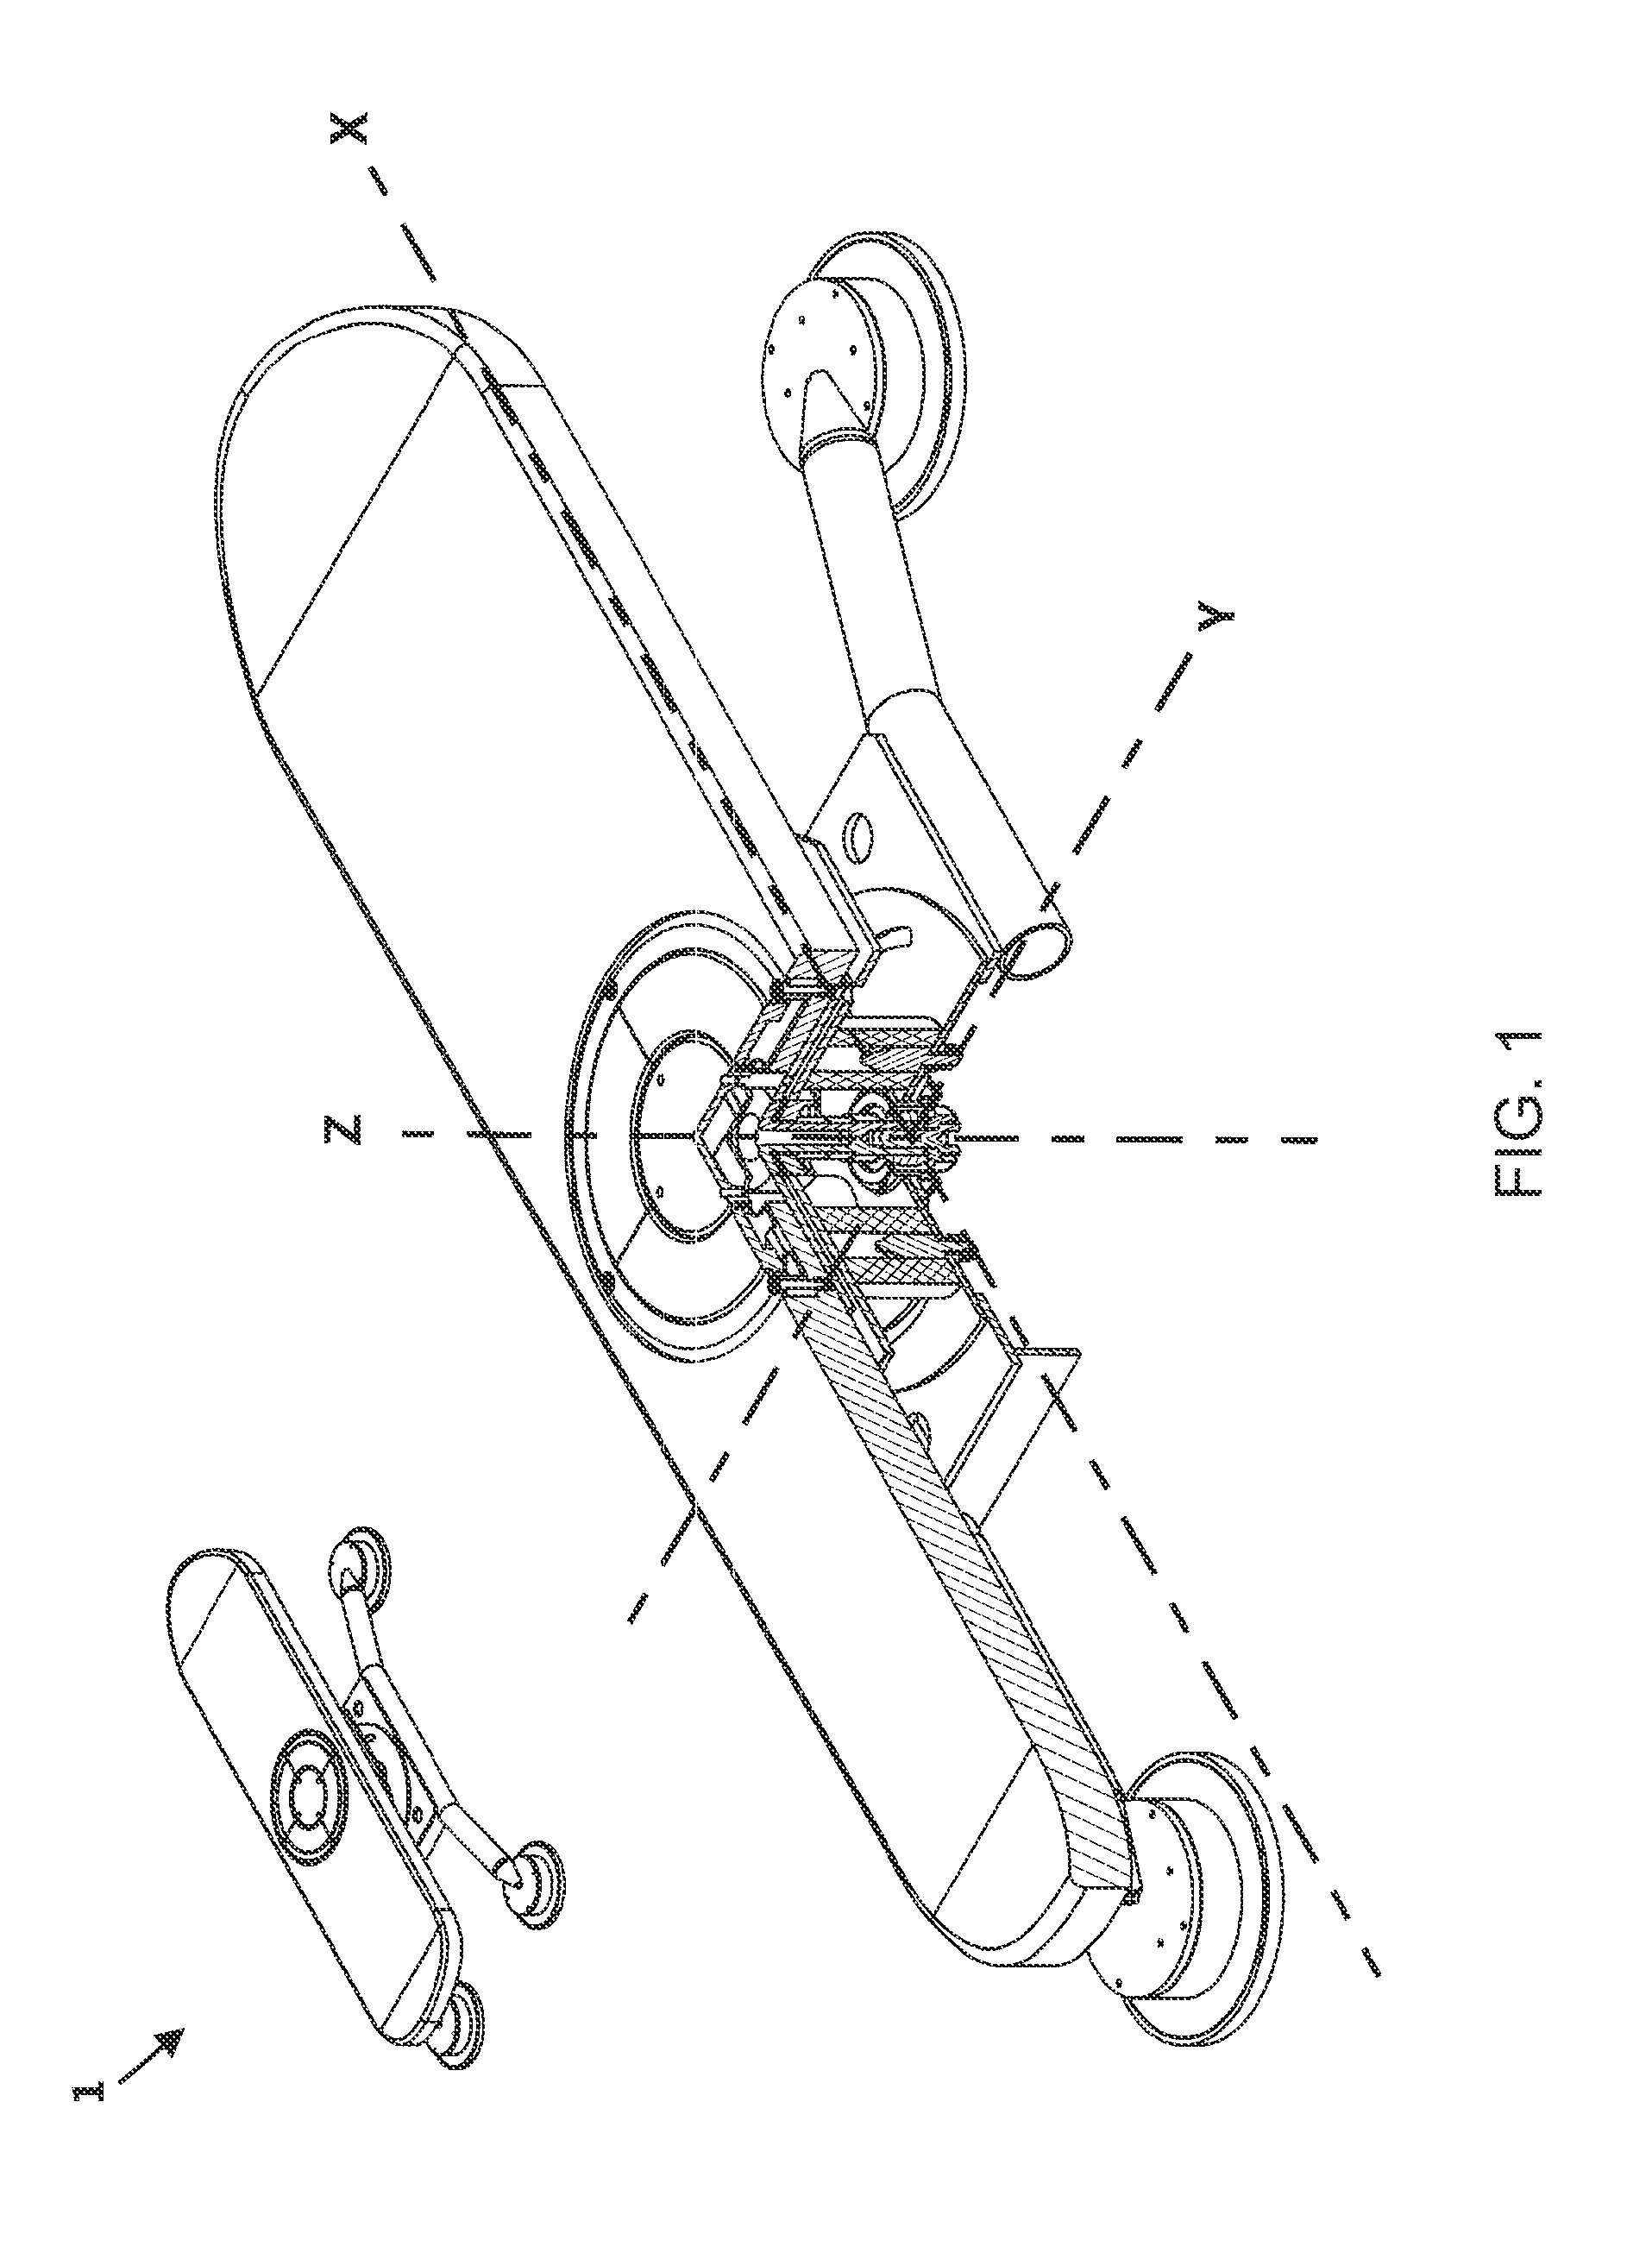 Device for balance exercises and balance games using variable restoring forces